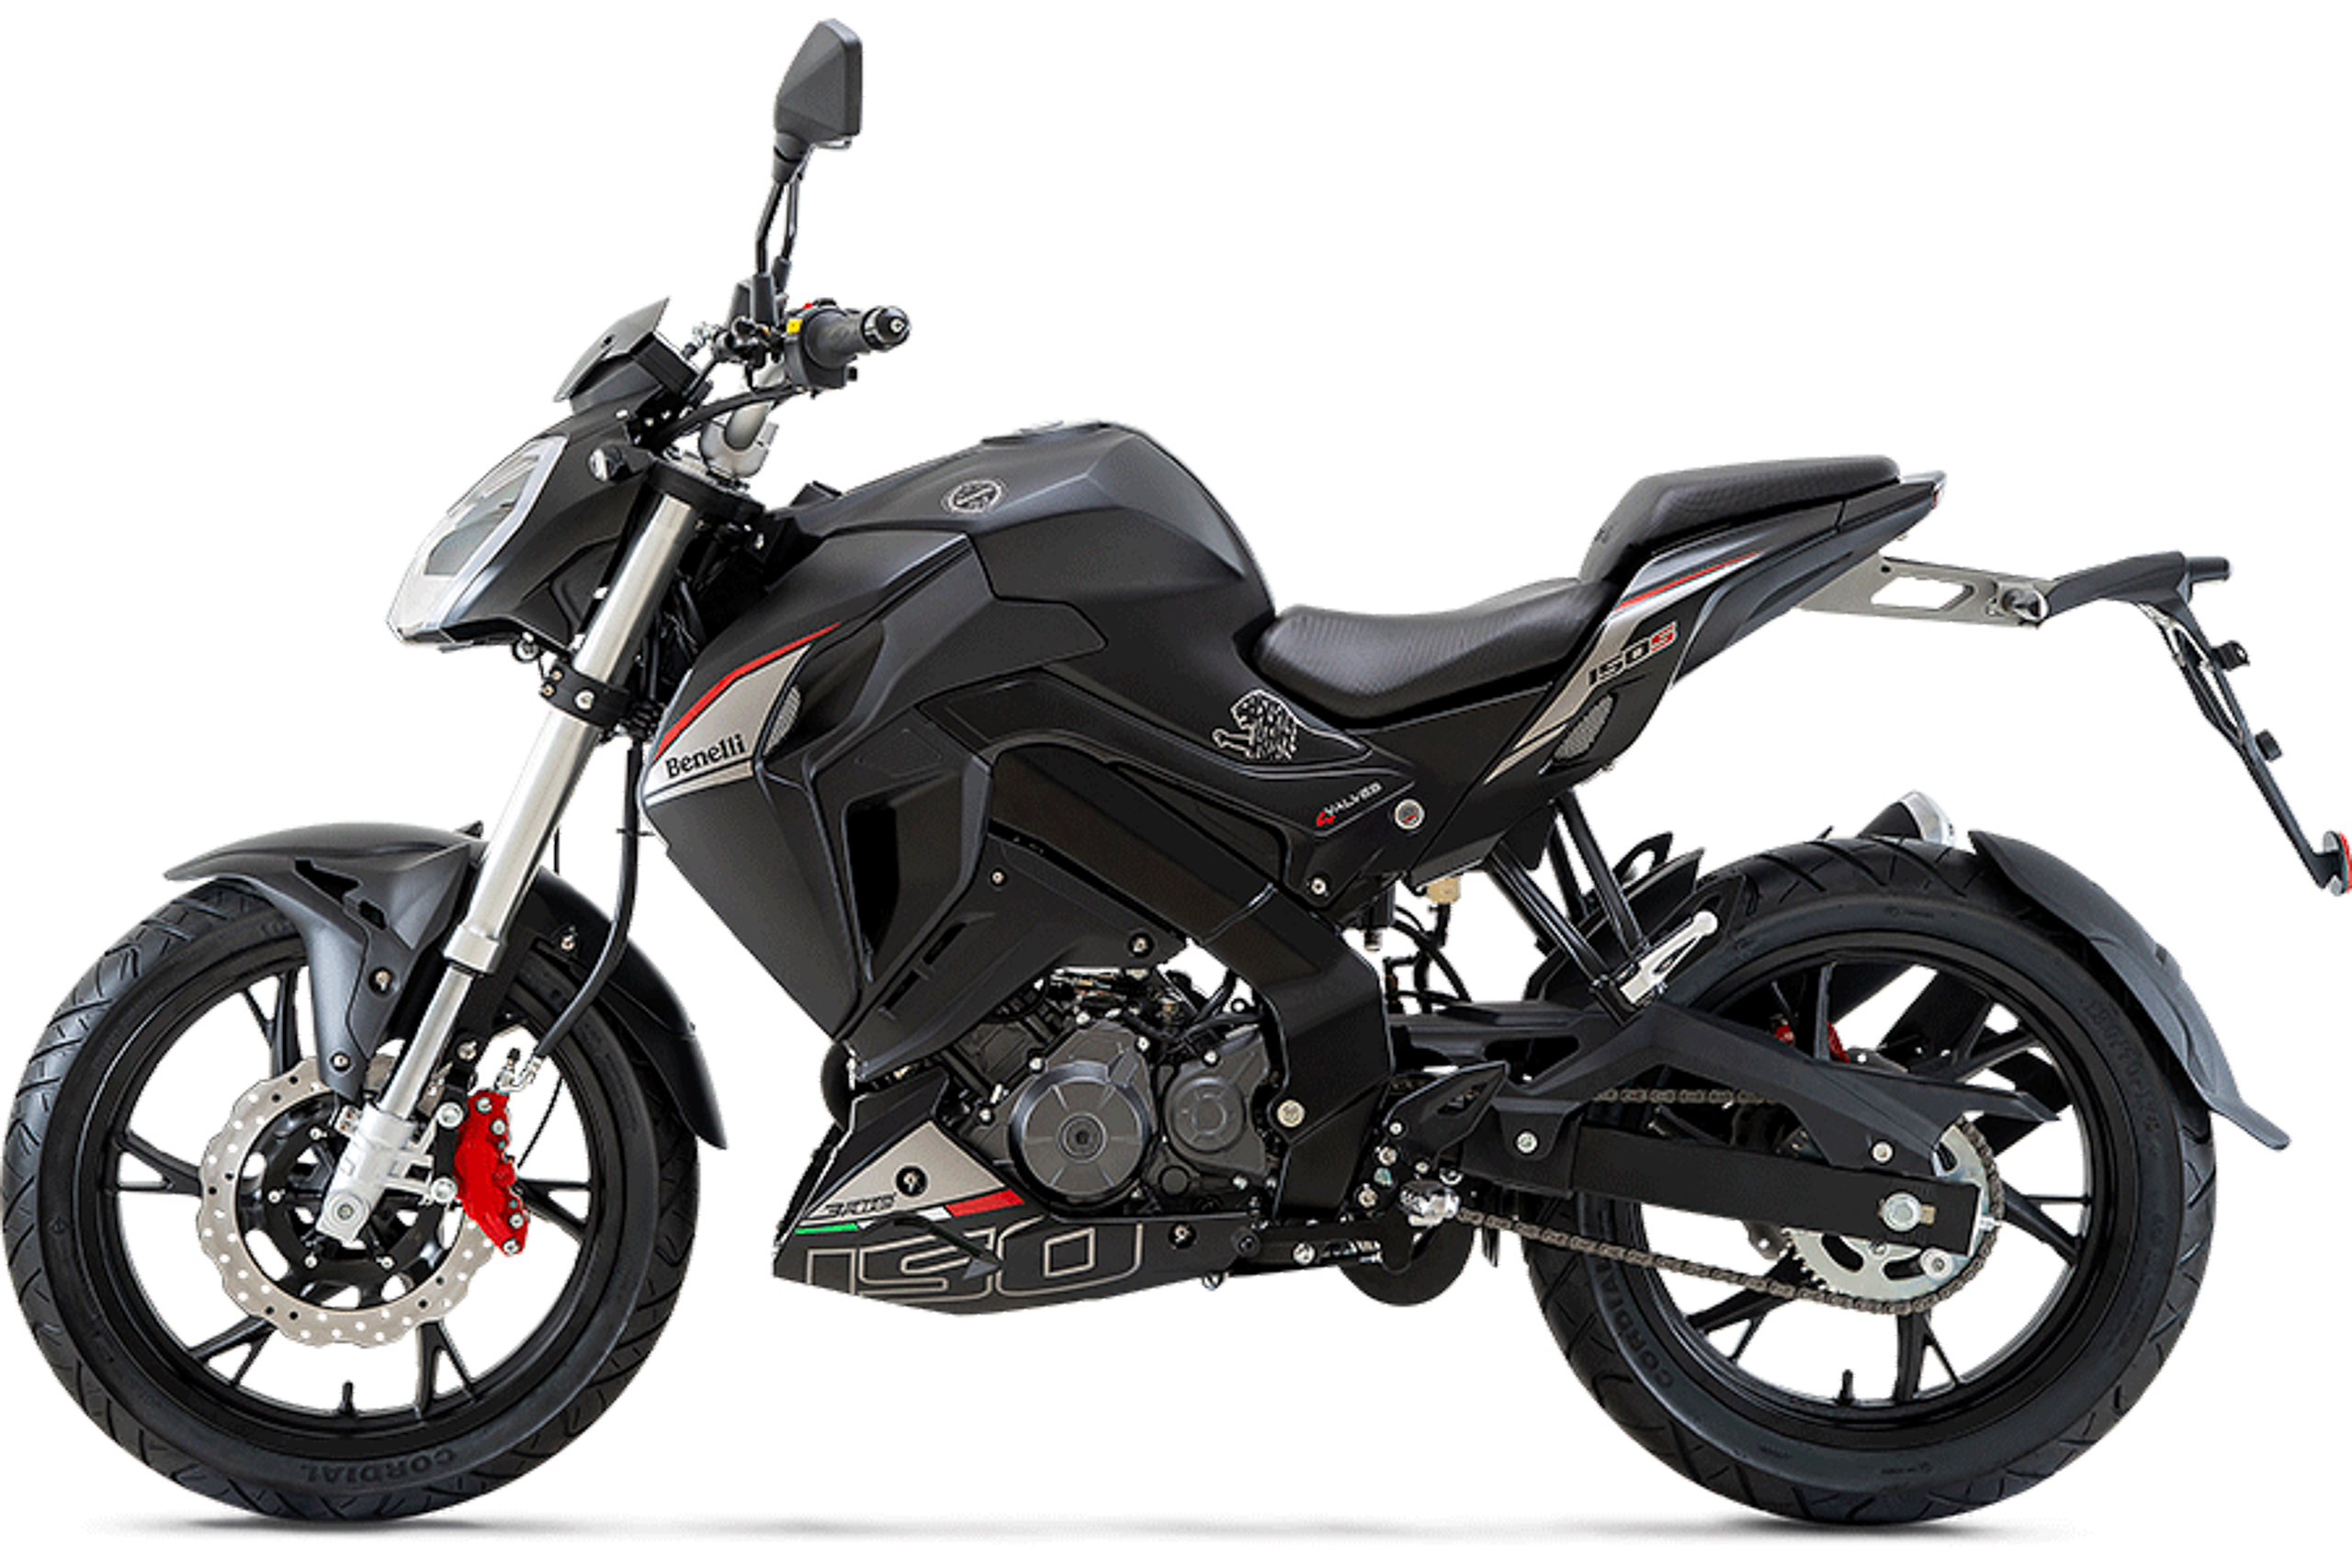 2019 Benelli 502C and 150S now in Malaysia - 502C priced at RM31,588 ...